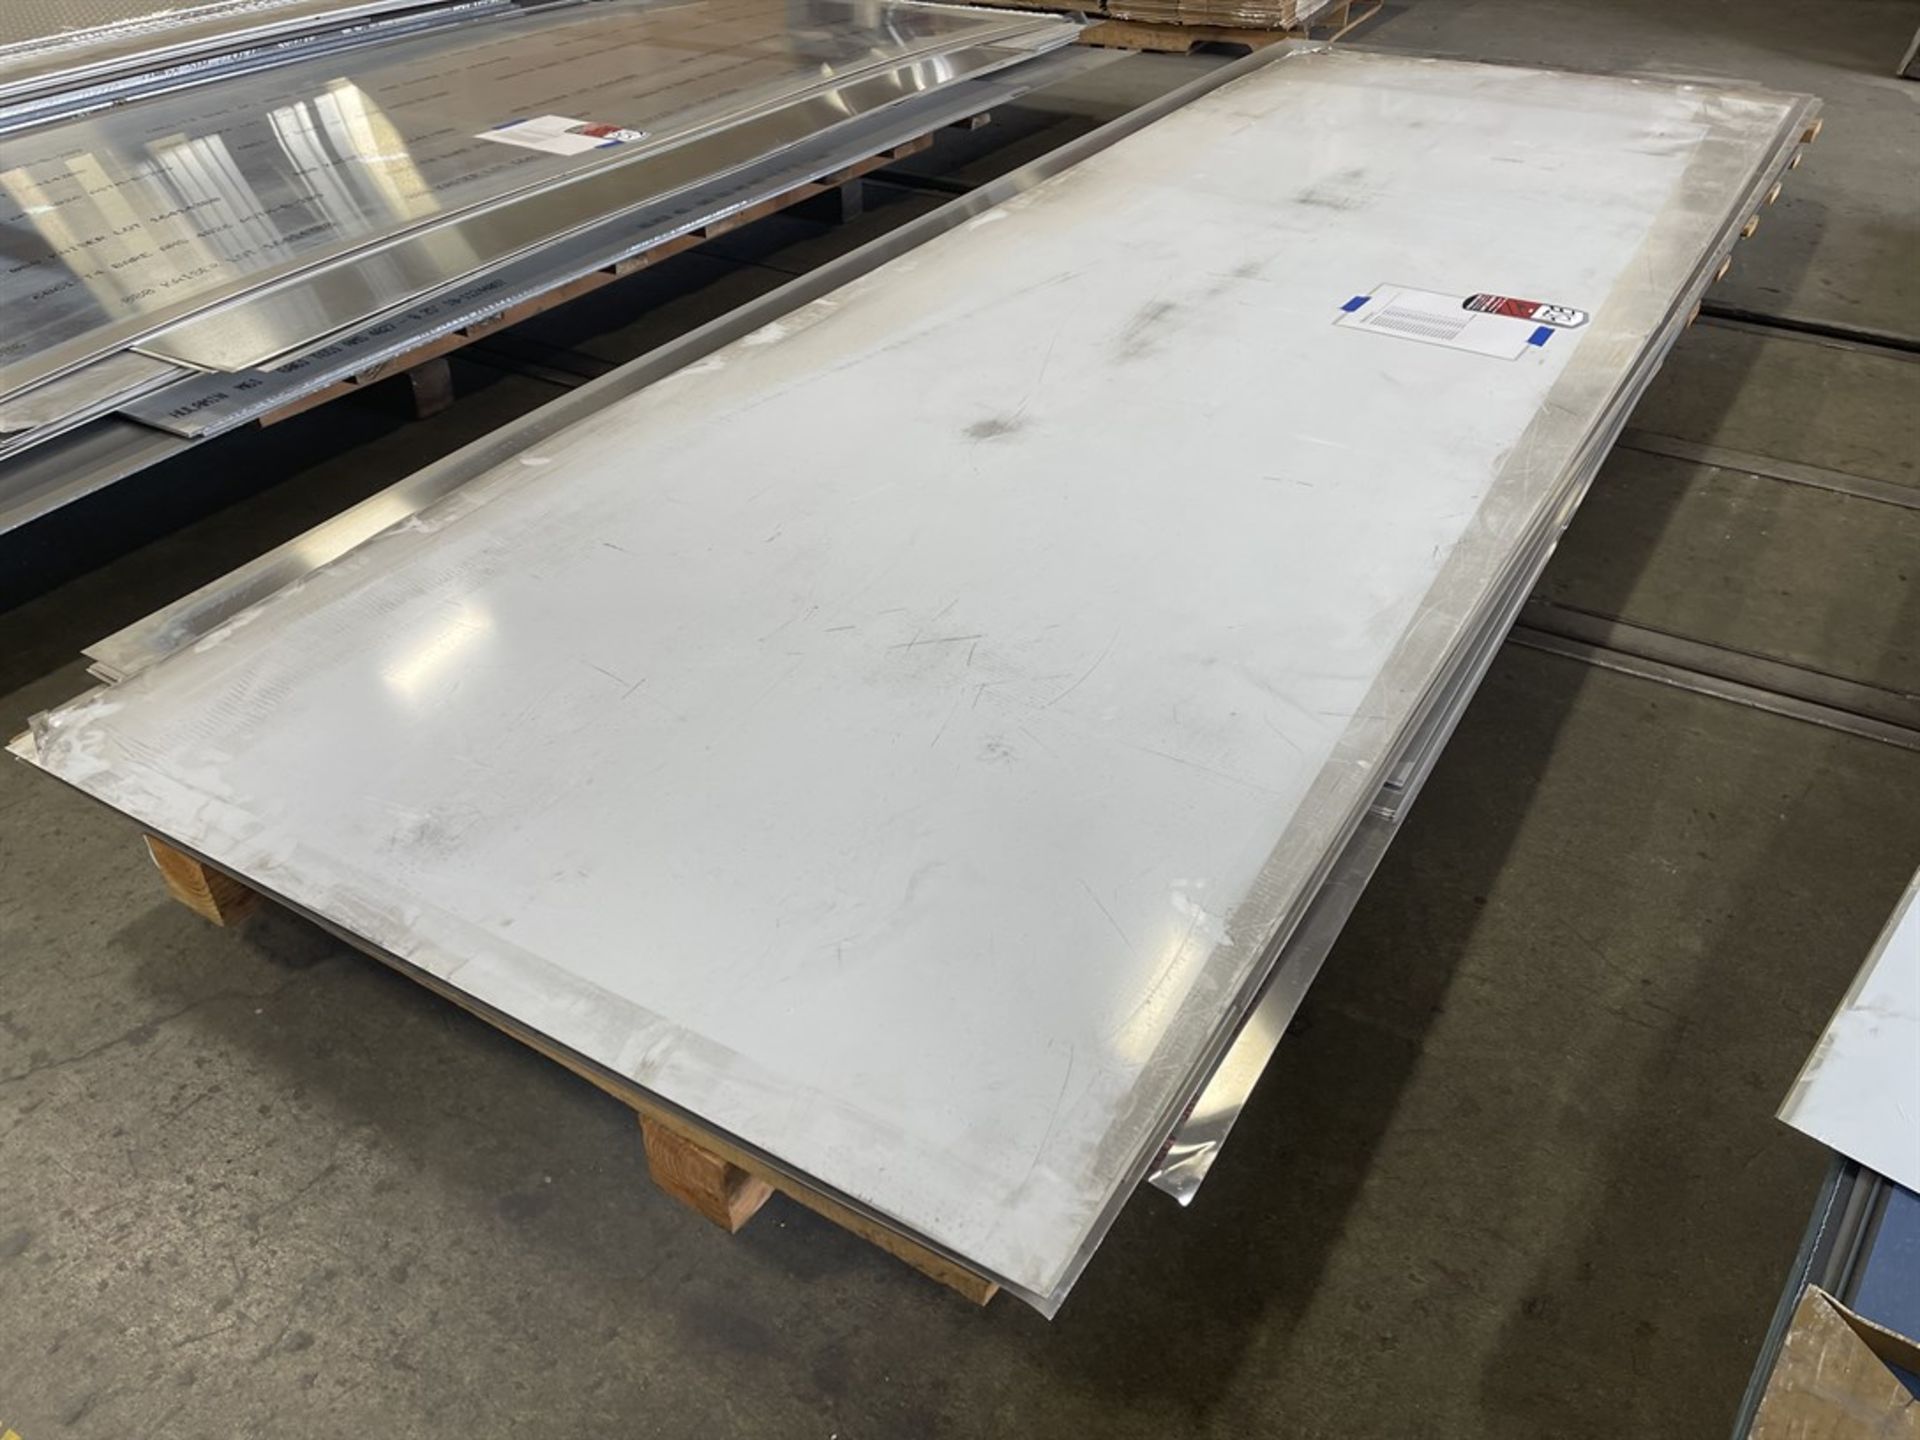 Lot of Assorted Aluminum Sheet Stock Including 5052, 6061 and 7075